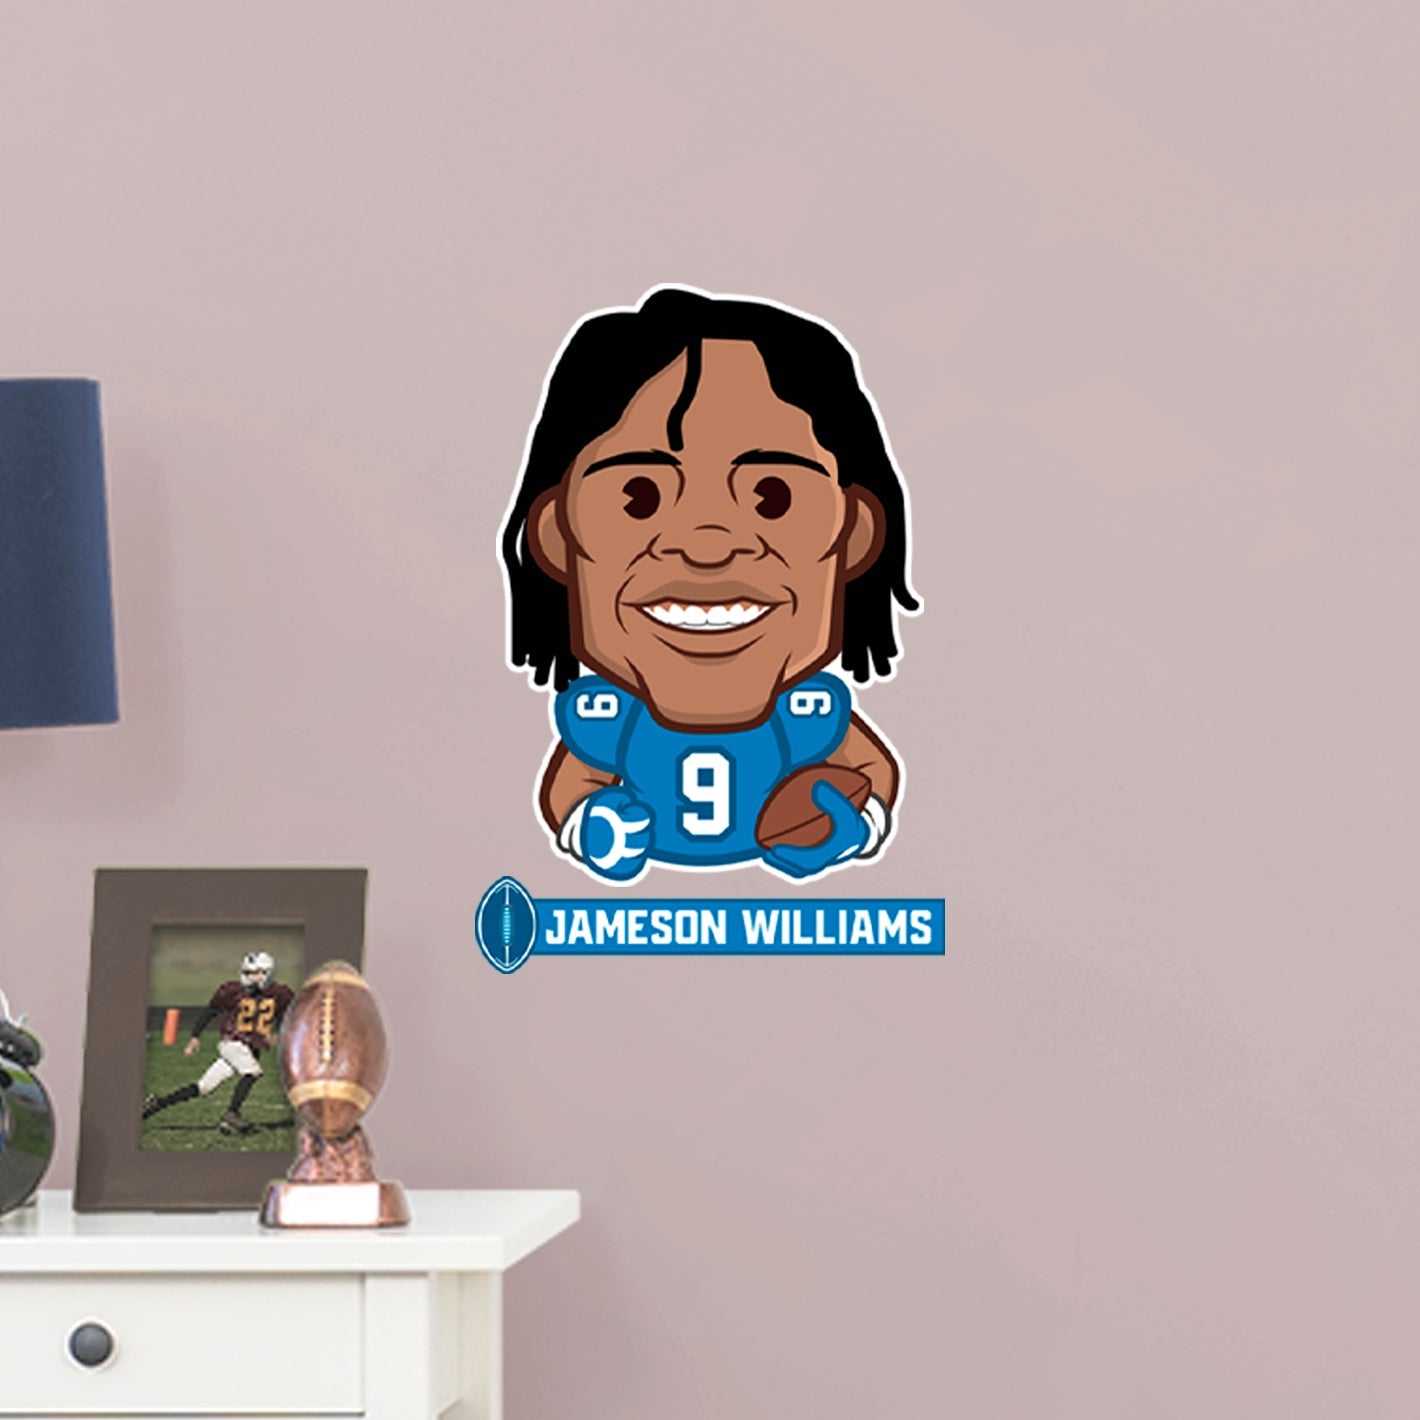 Detroit Lions: Jameson Williams Emoji - Officially Licensed NFLPA Removable Adhesive Decal